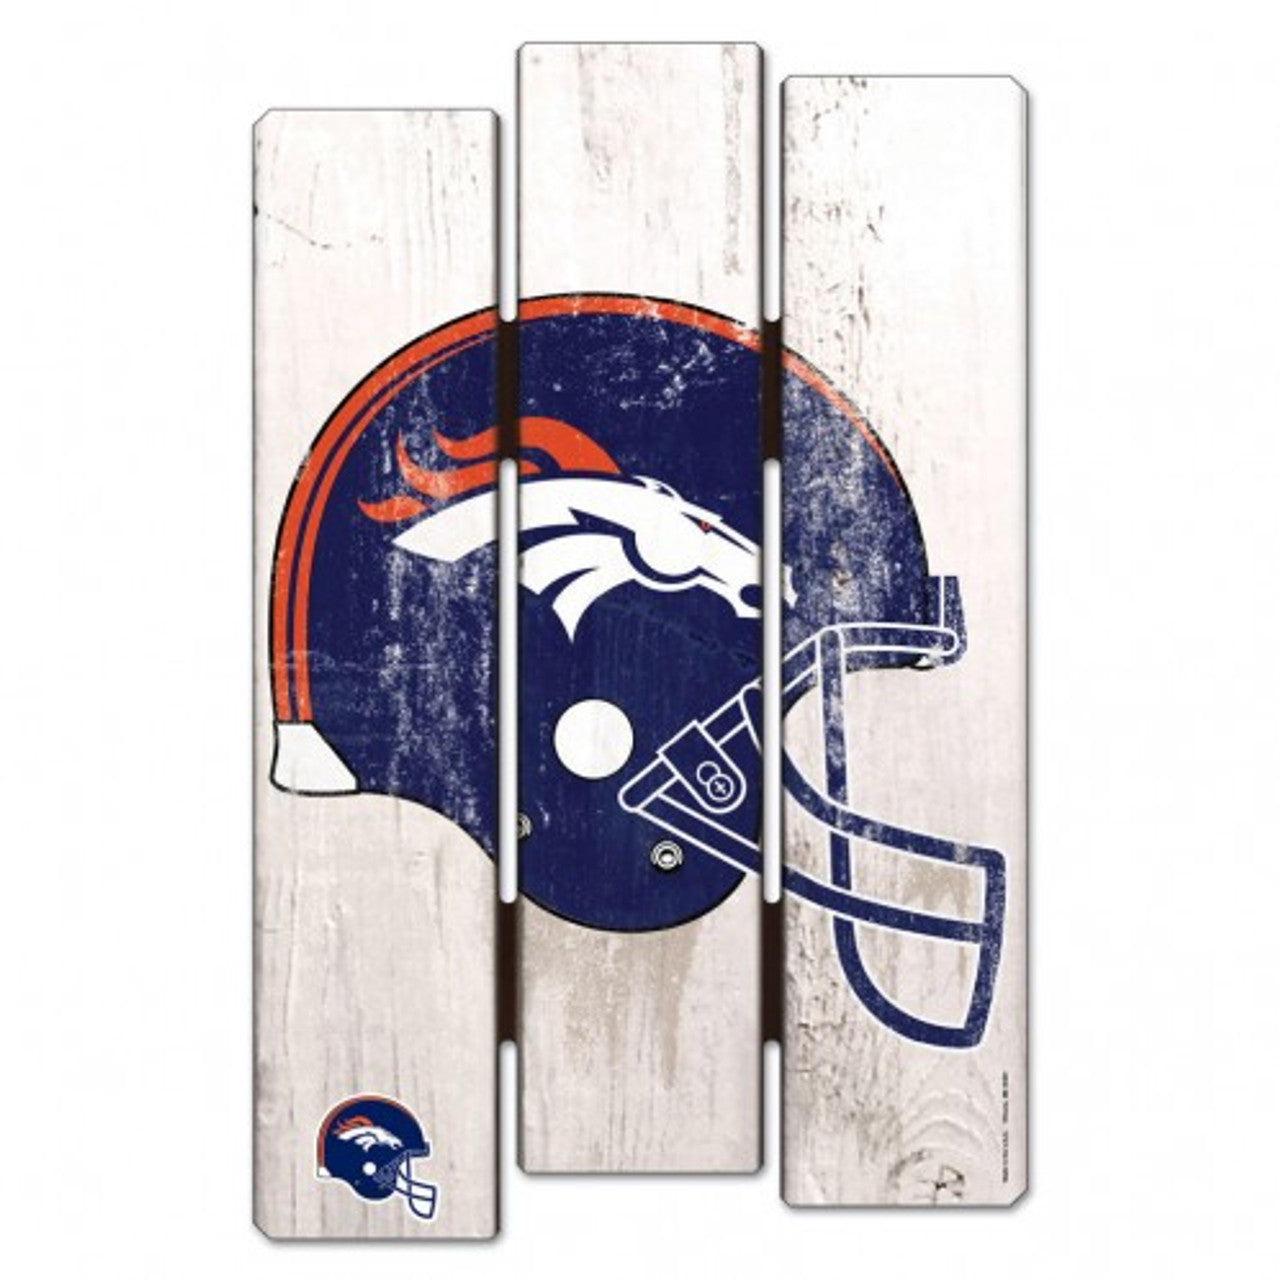 Denver Broncos 11" x 17" Wood Fence Sign by Wincraft